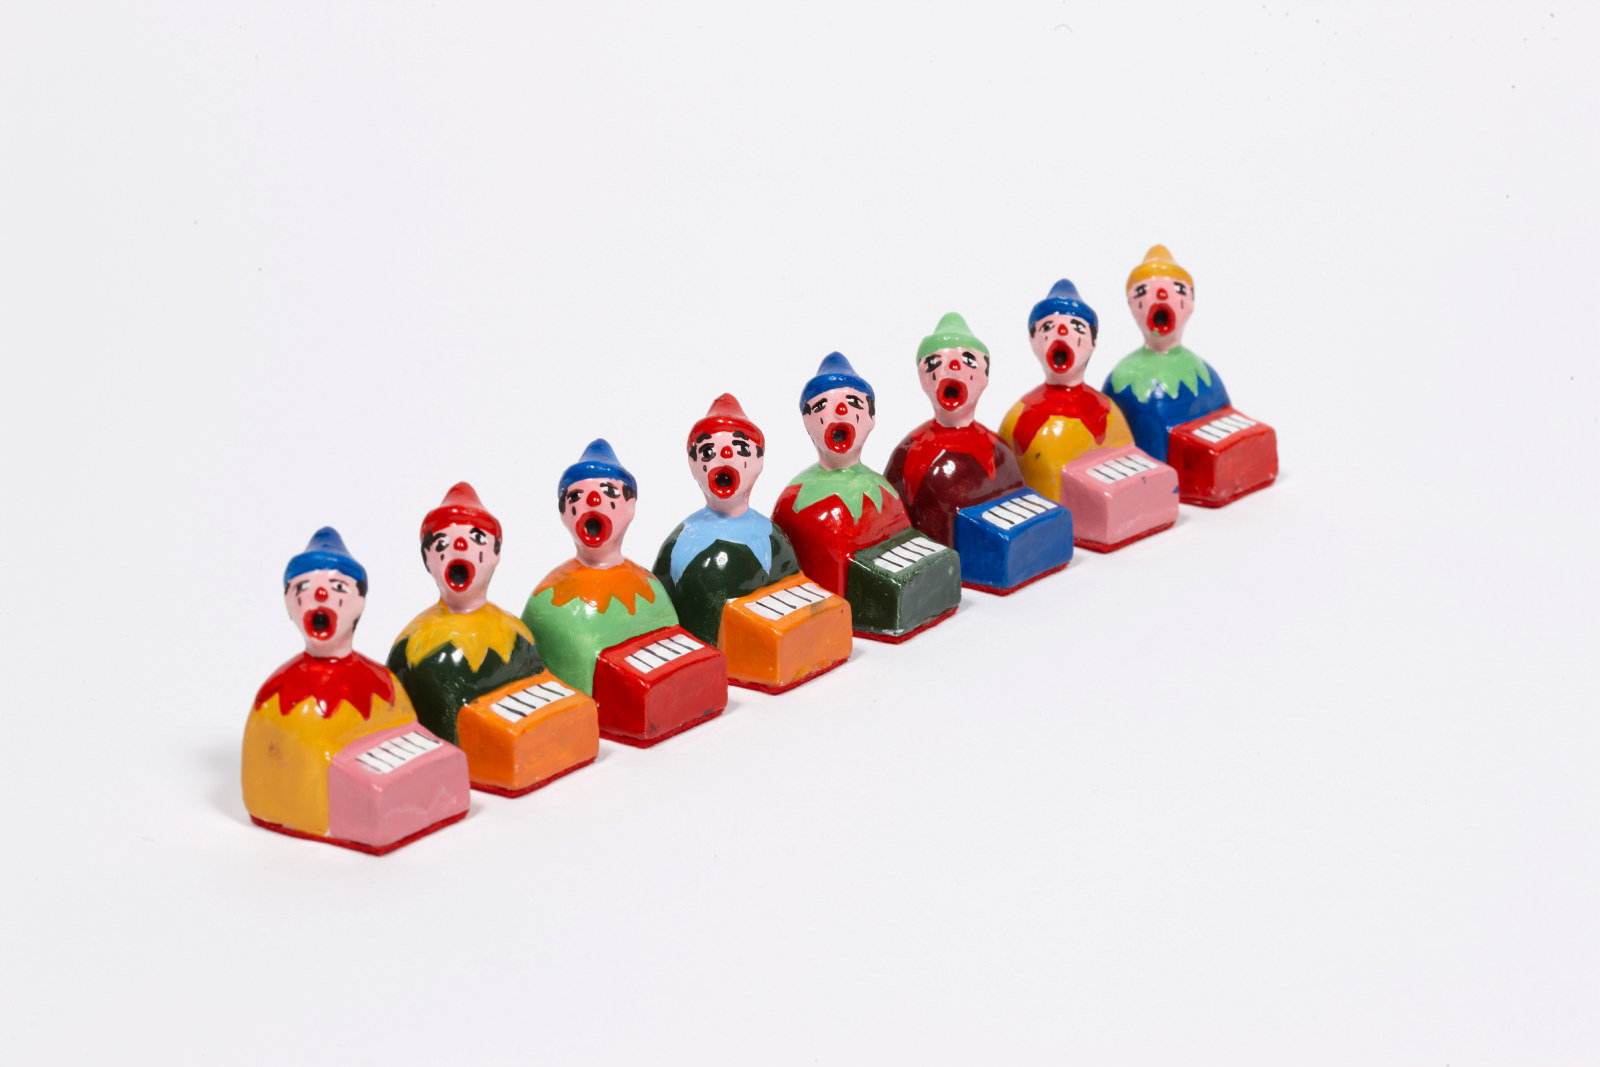 Pawn chess pieces from Luna Park chess set, created by artist Peter Kingston in 2001